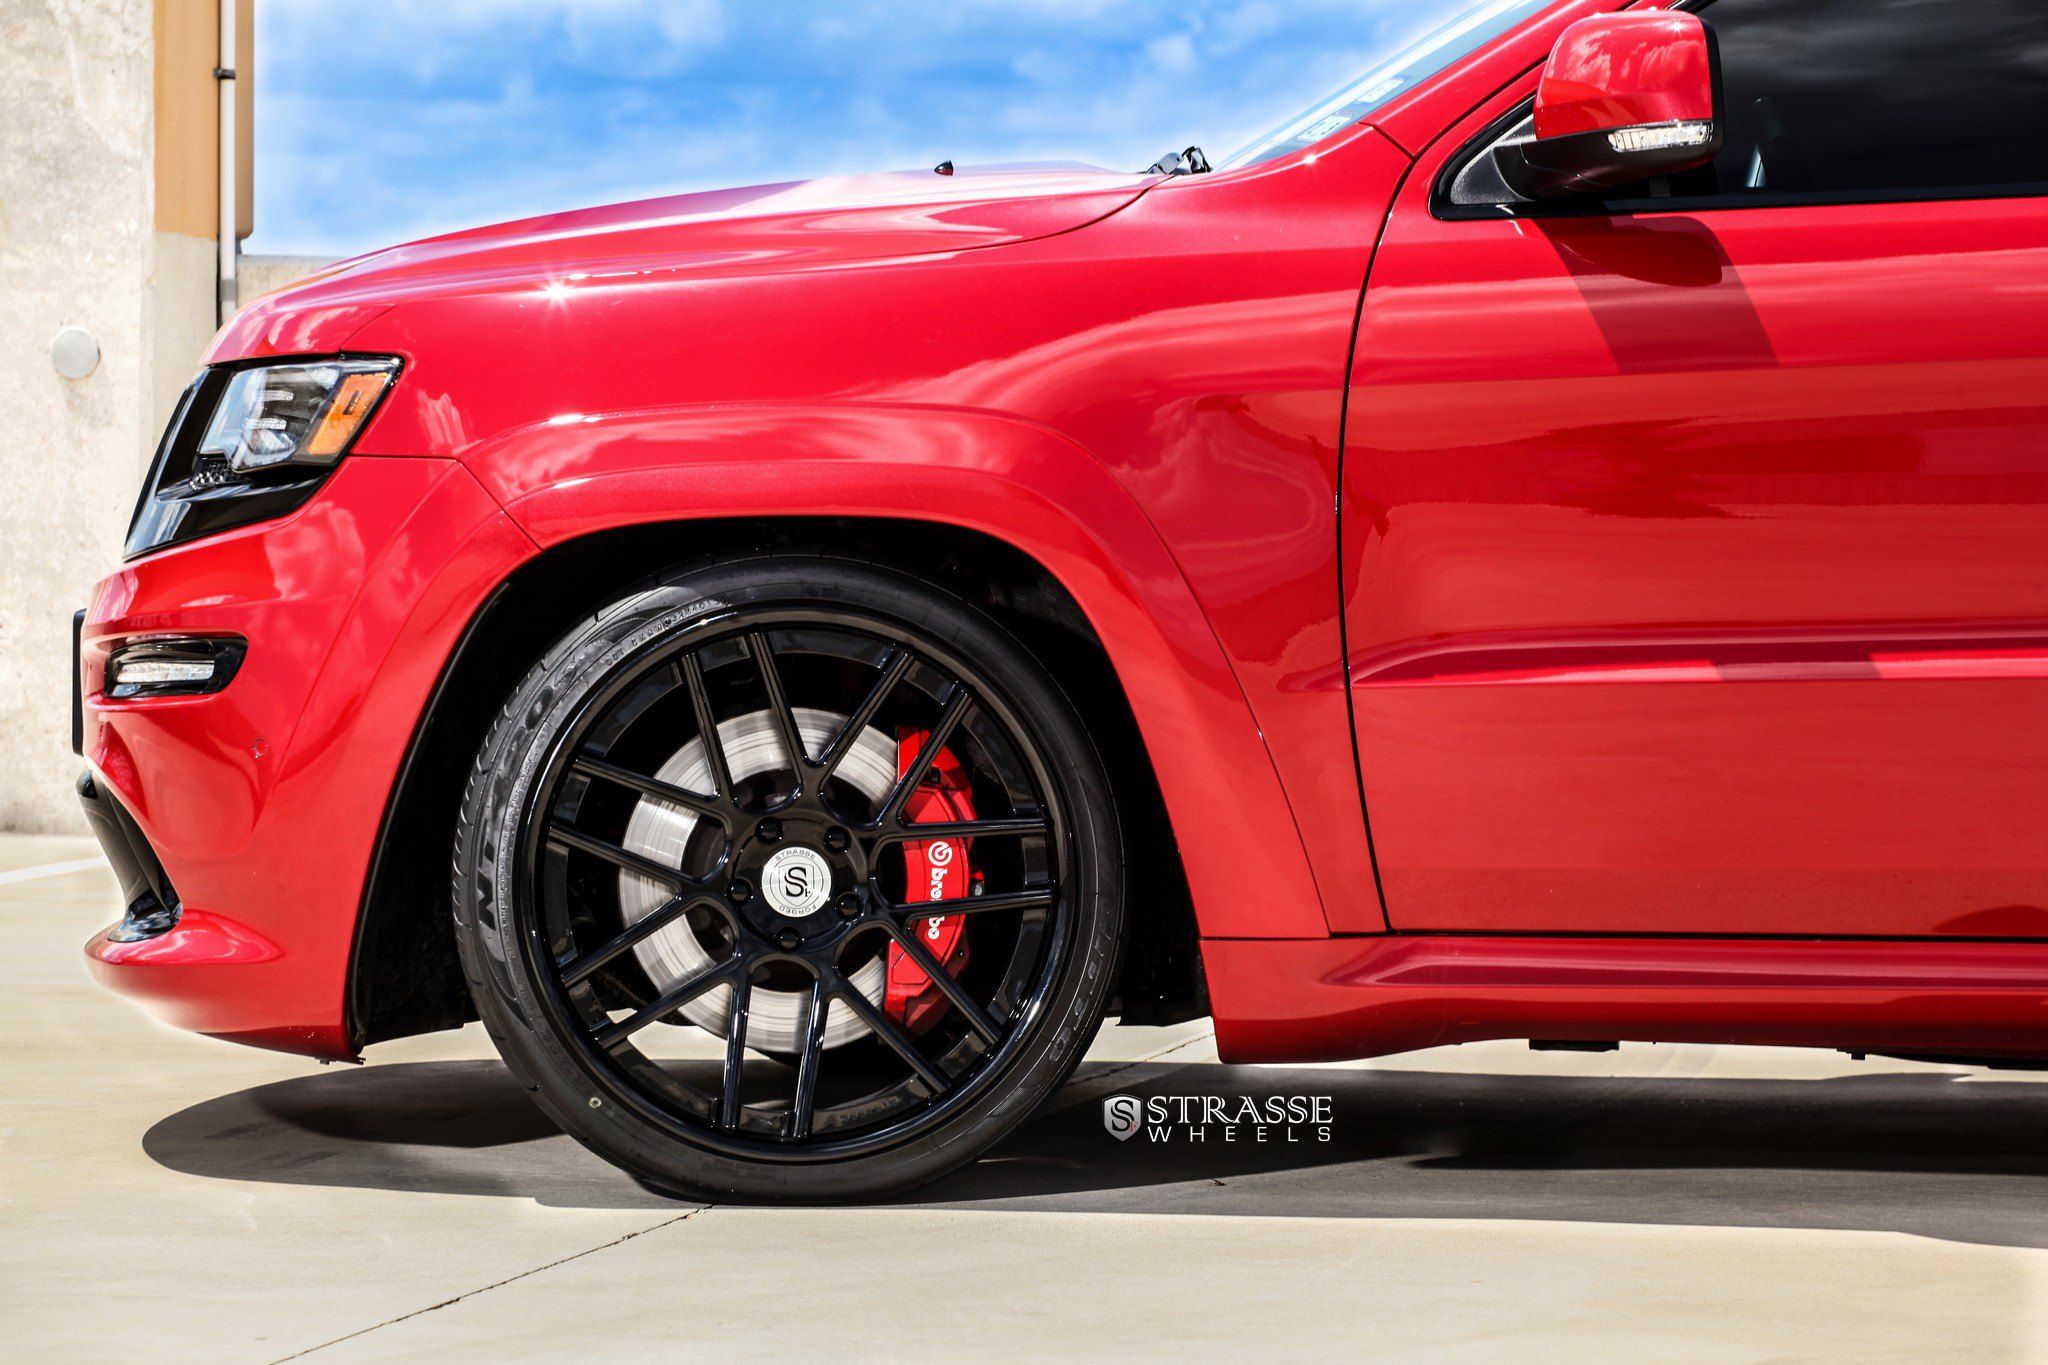 Aftermarket Side Skirts on Red Jeep Grand Cherokee - Photo by Strasse Forged